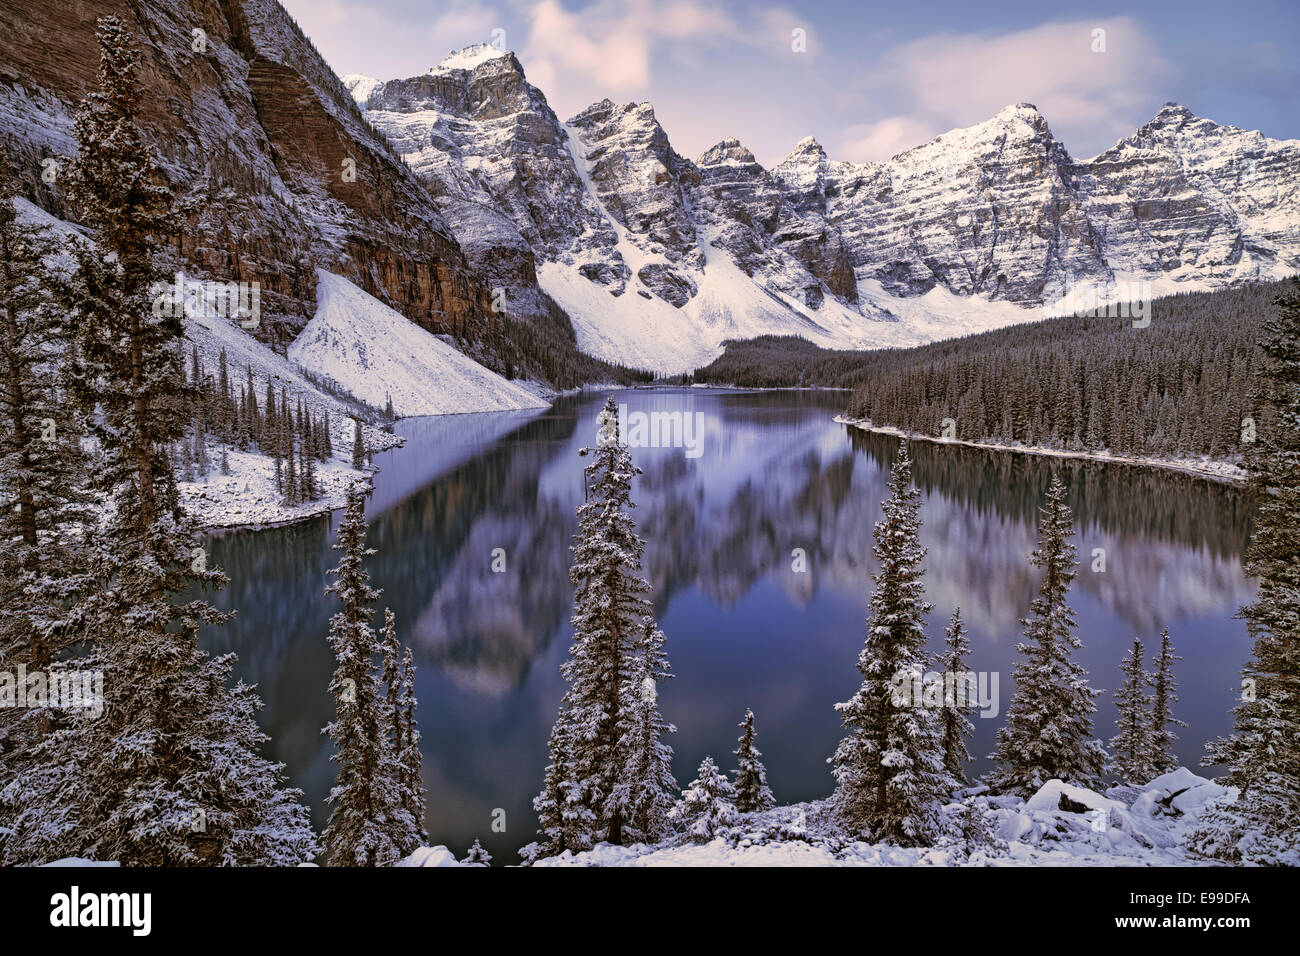 Autumn snowfall at Moraine Lake with the Valley of Ten Peaks in Alberta's Canadian Rockies and Banff National Park. Stock Photo